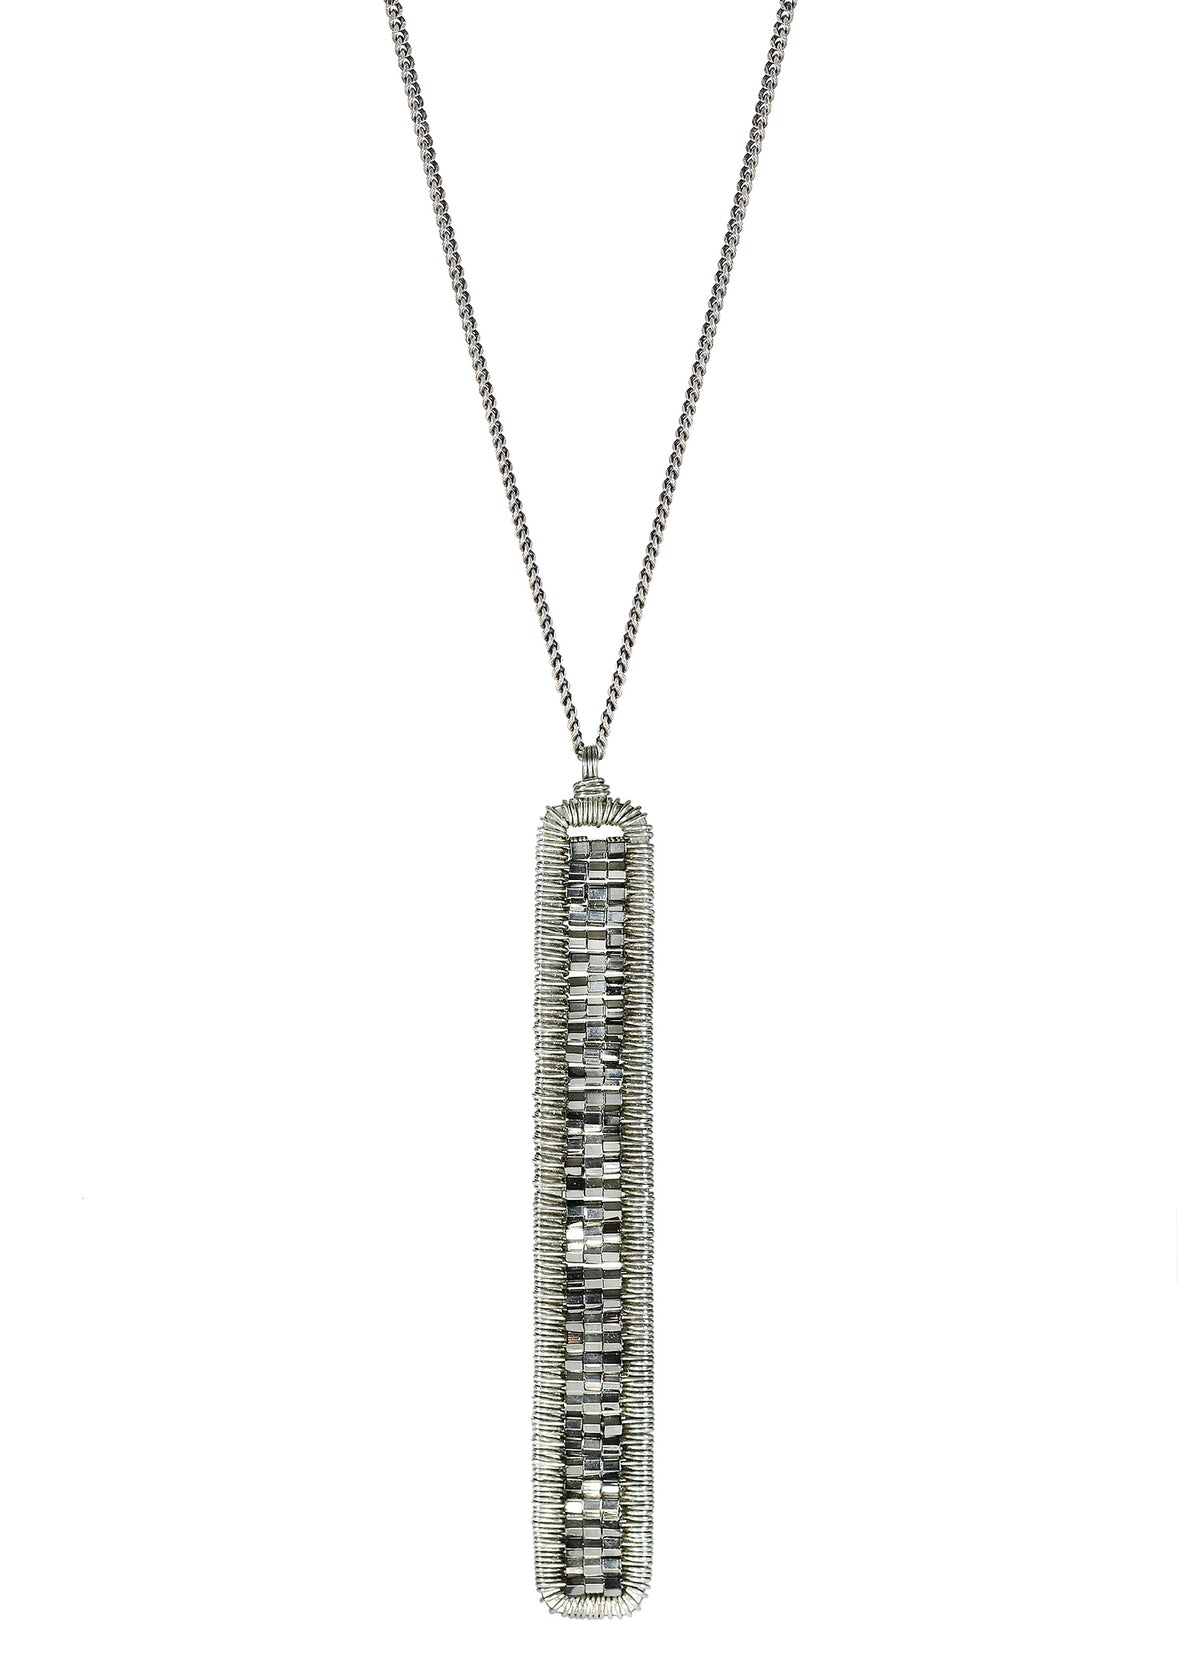 Sterling silver Gunmetal seed beads Necklace measures 29-3/4” Handmade in our Los Angeles studio